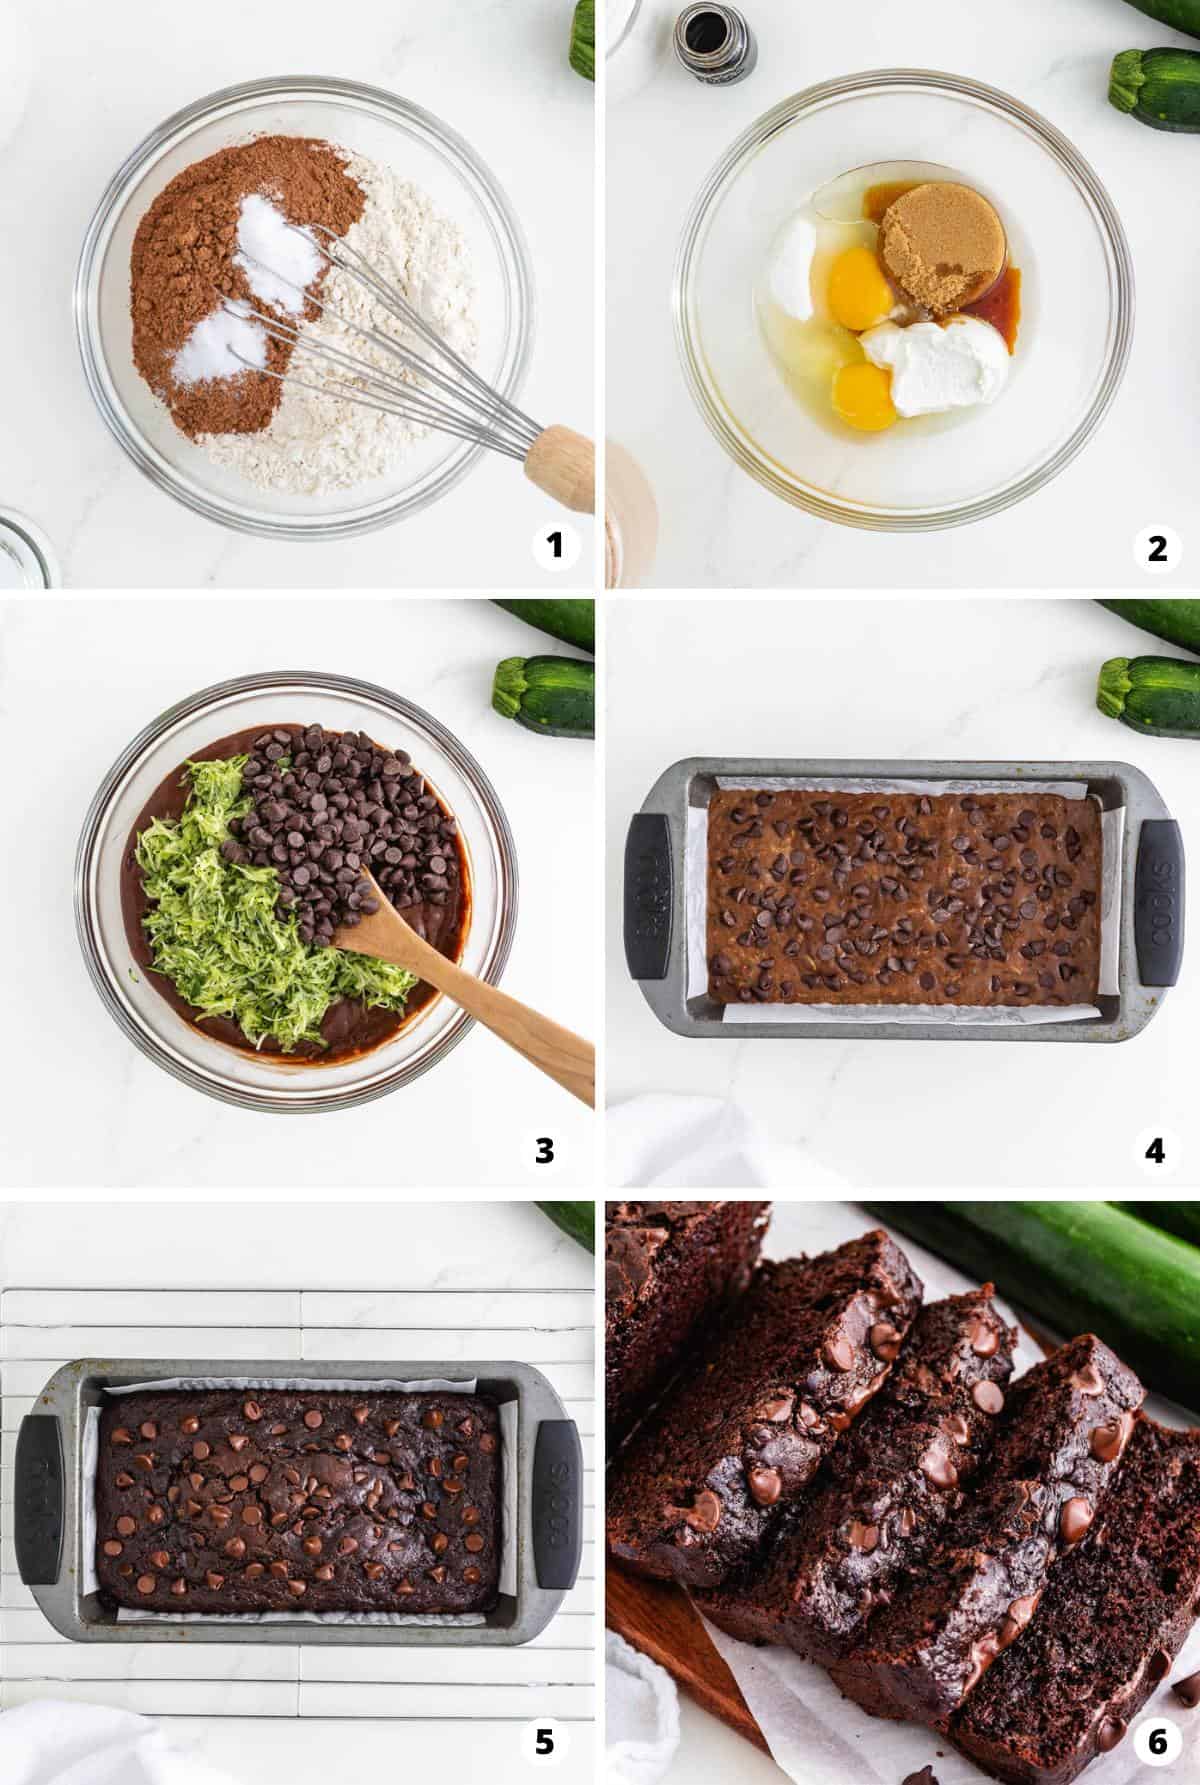 Showing how to make chocolate zucchini bread in a 6 step collage.